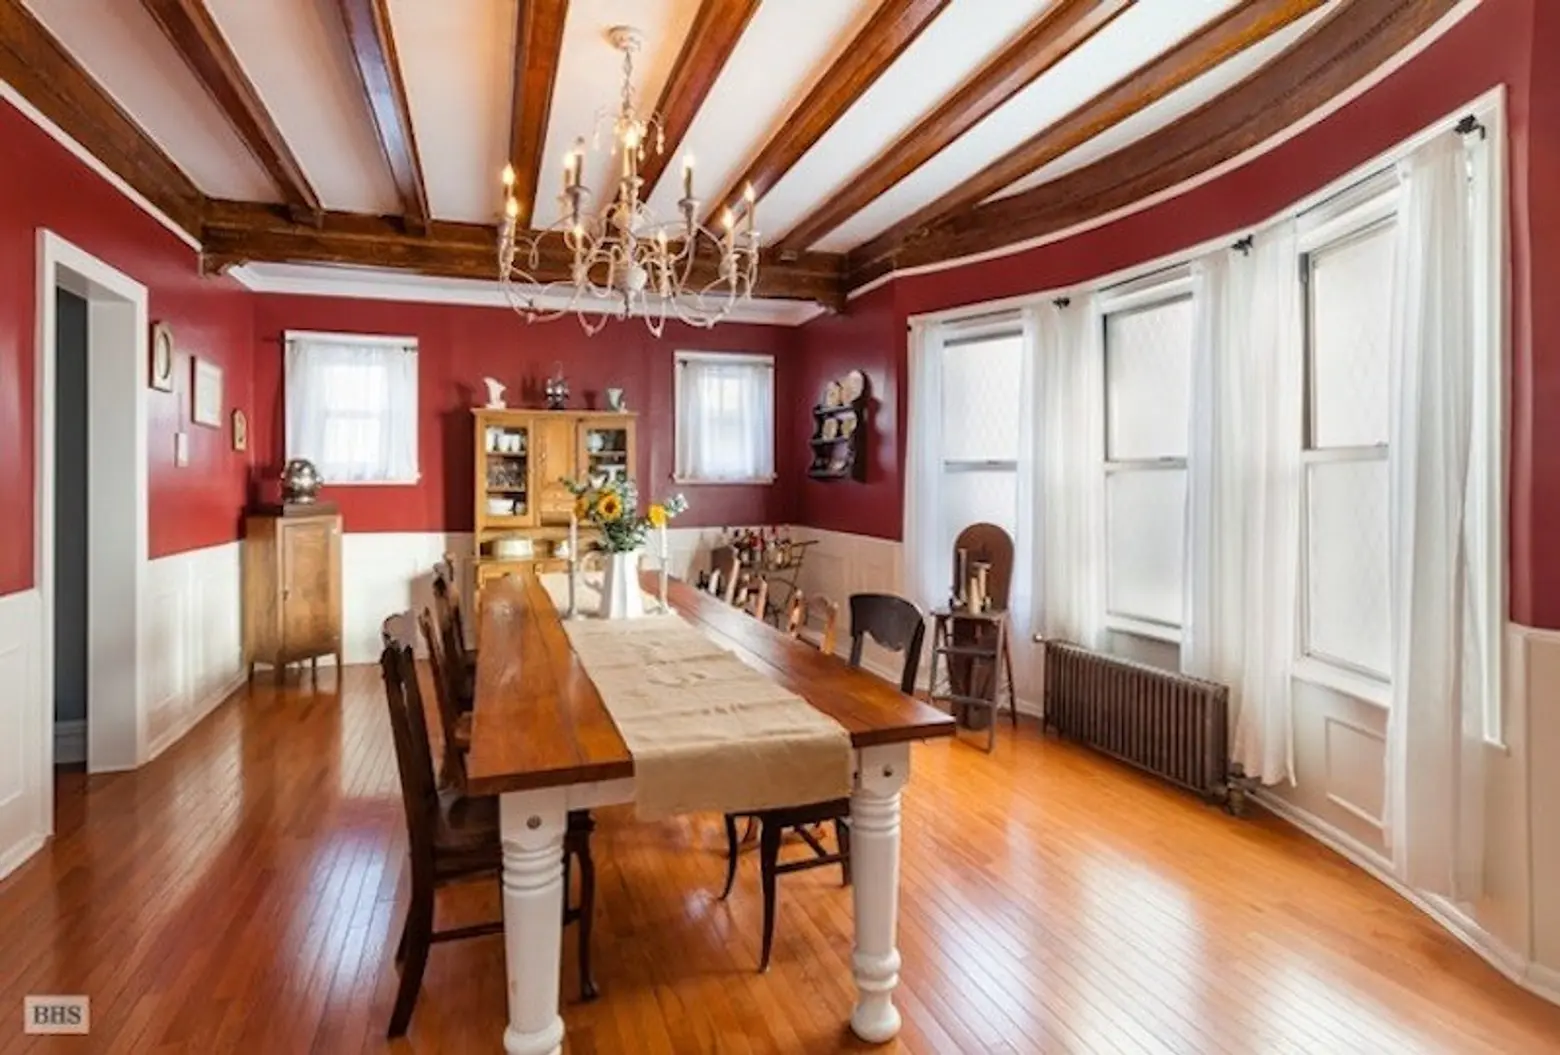 $1.9M freestanding home in Flatbush offers more than enough room for entertaining